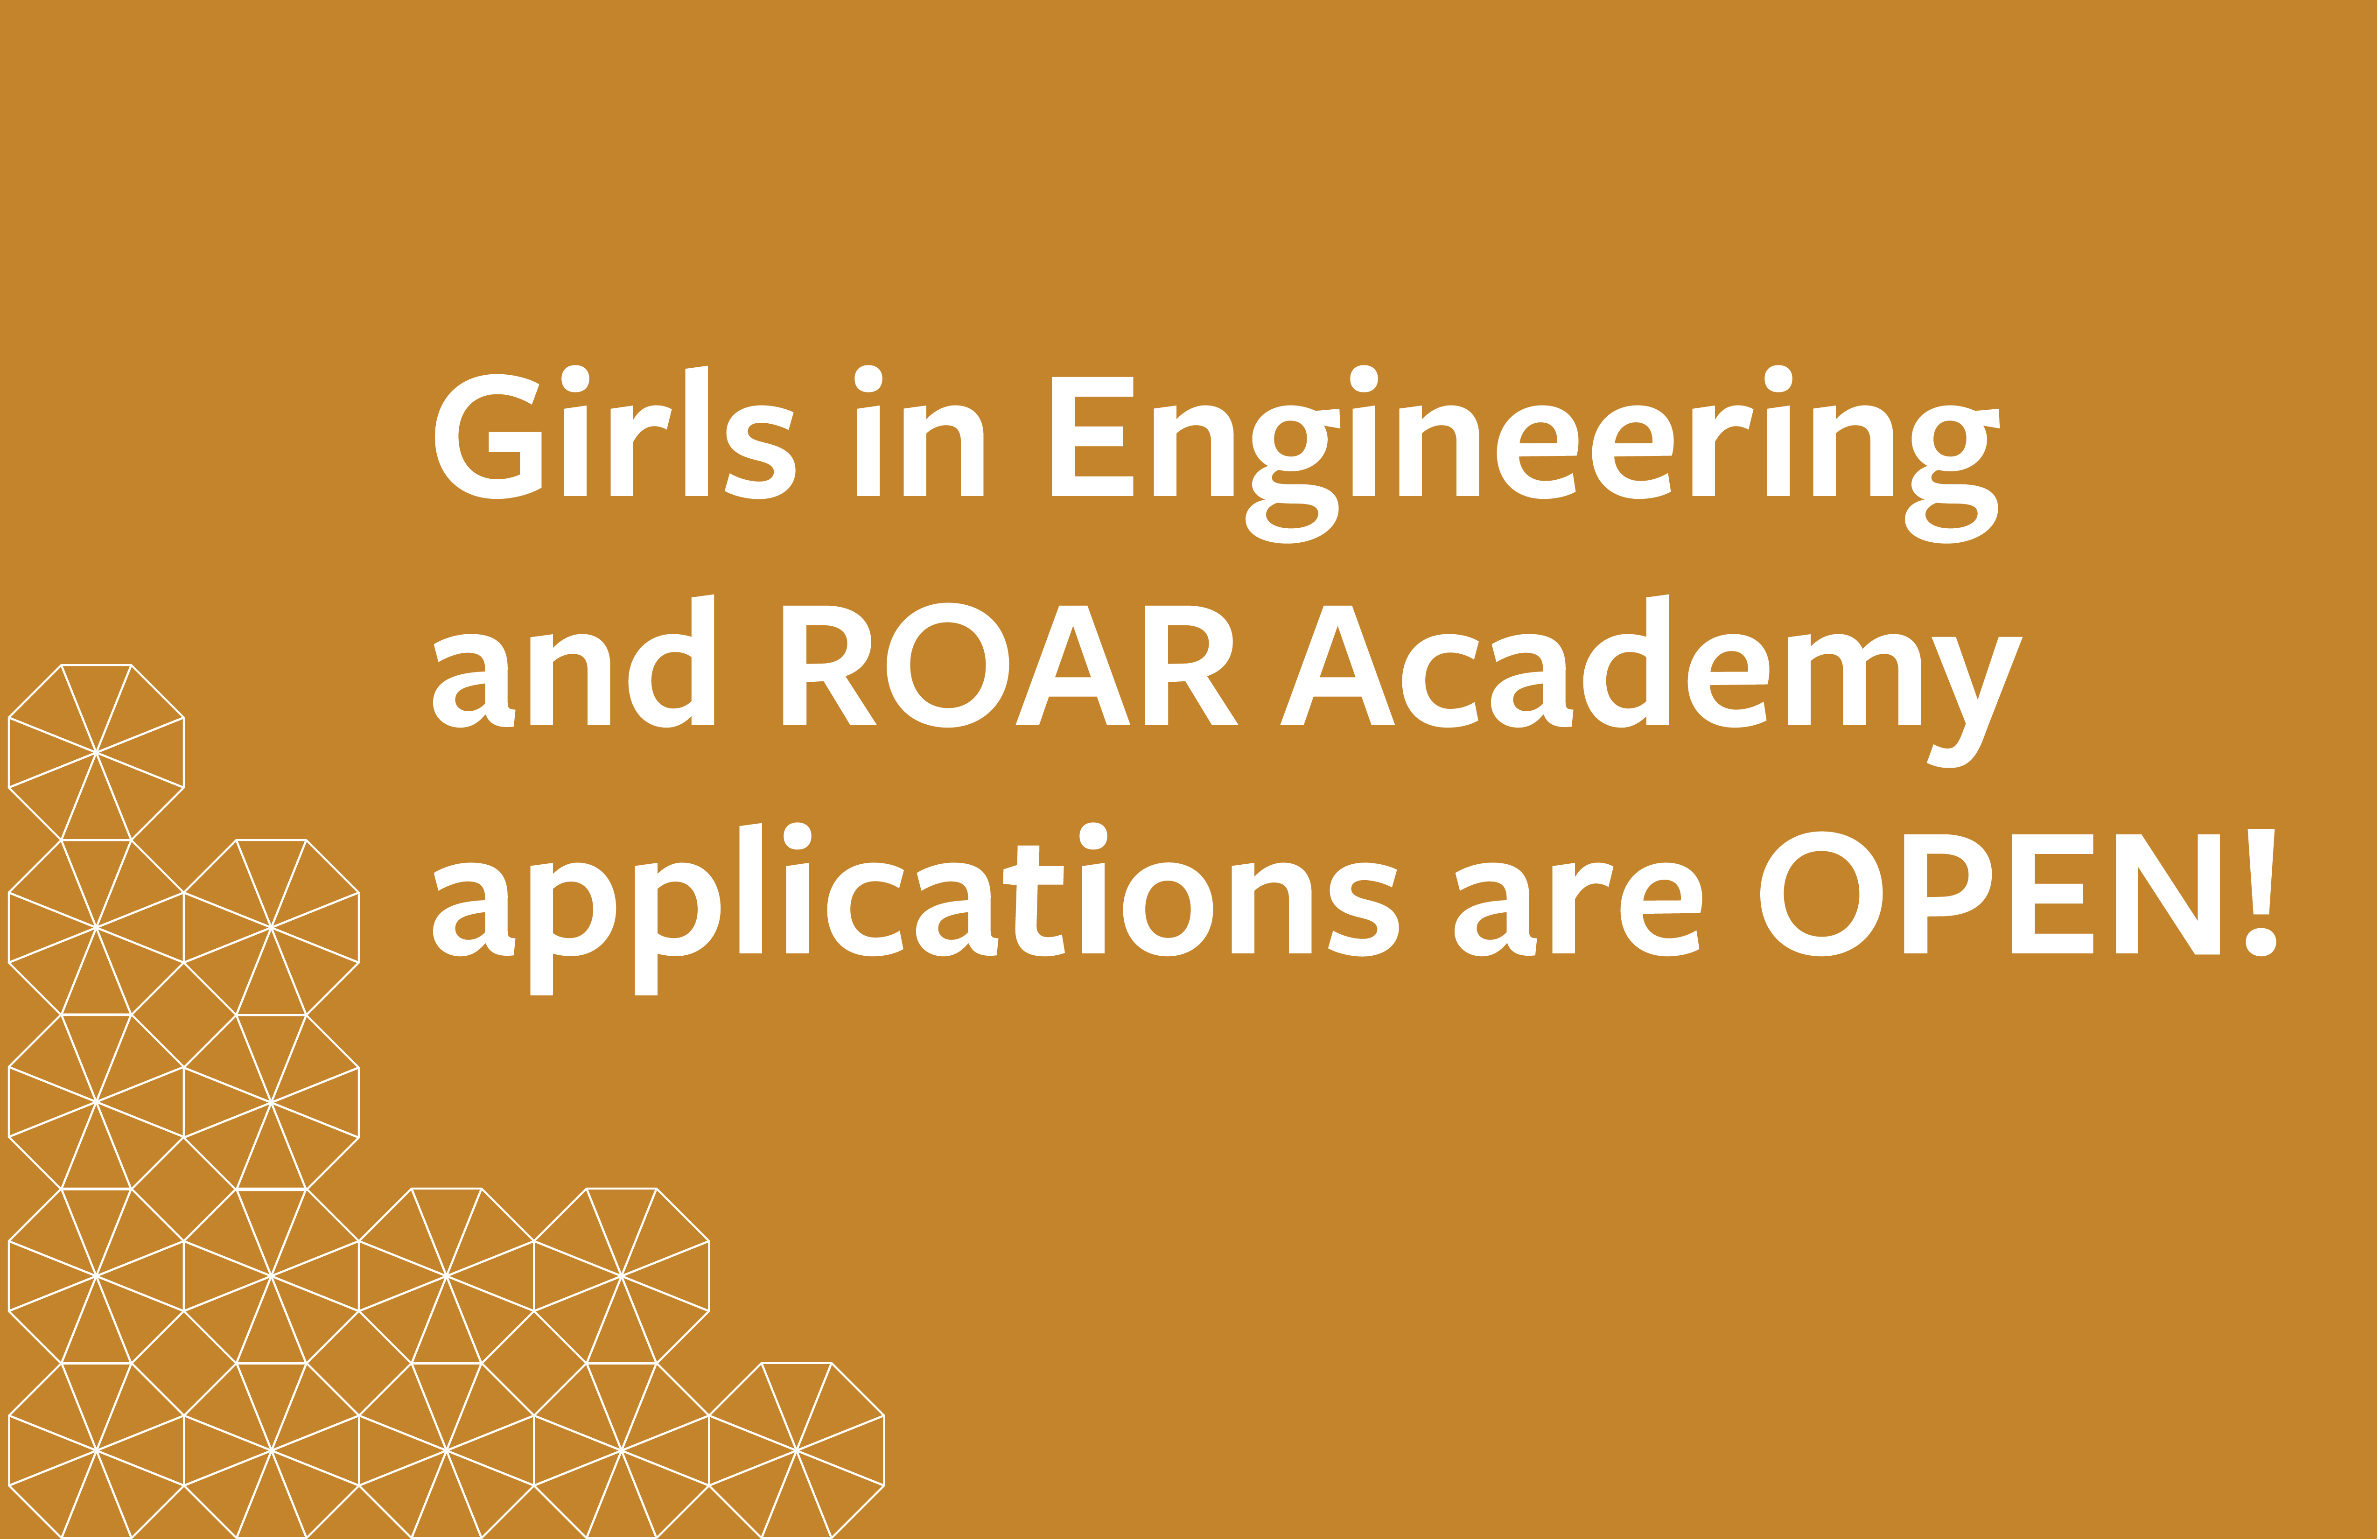 Girls in Engineering and ROAR Academy applications are OPEN!